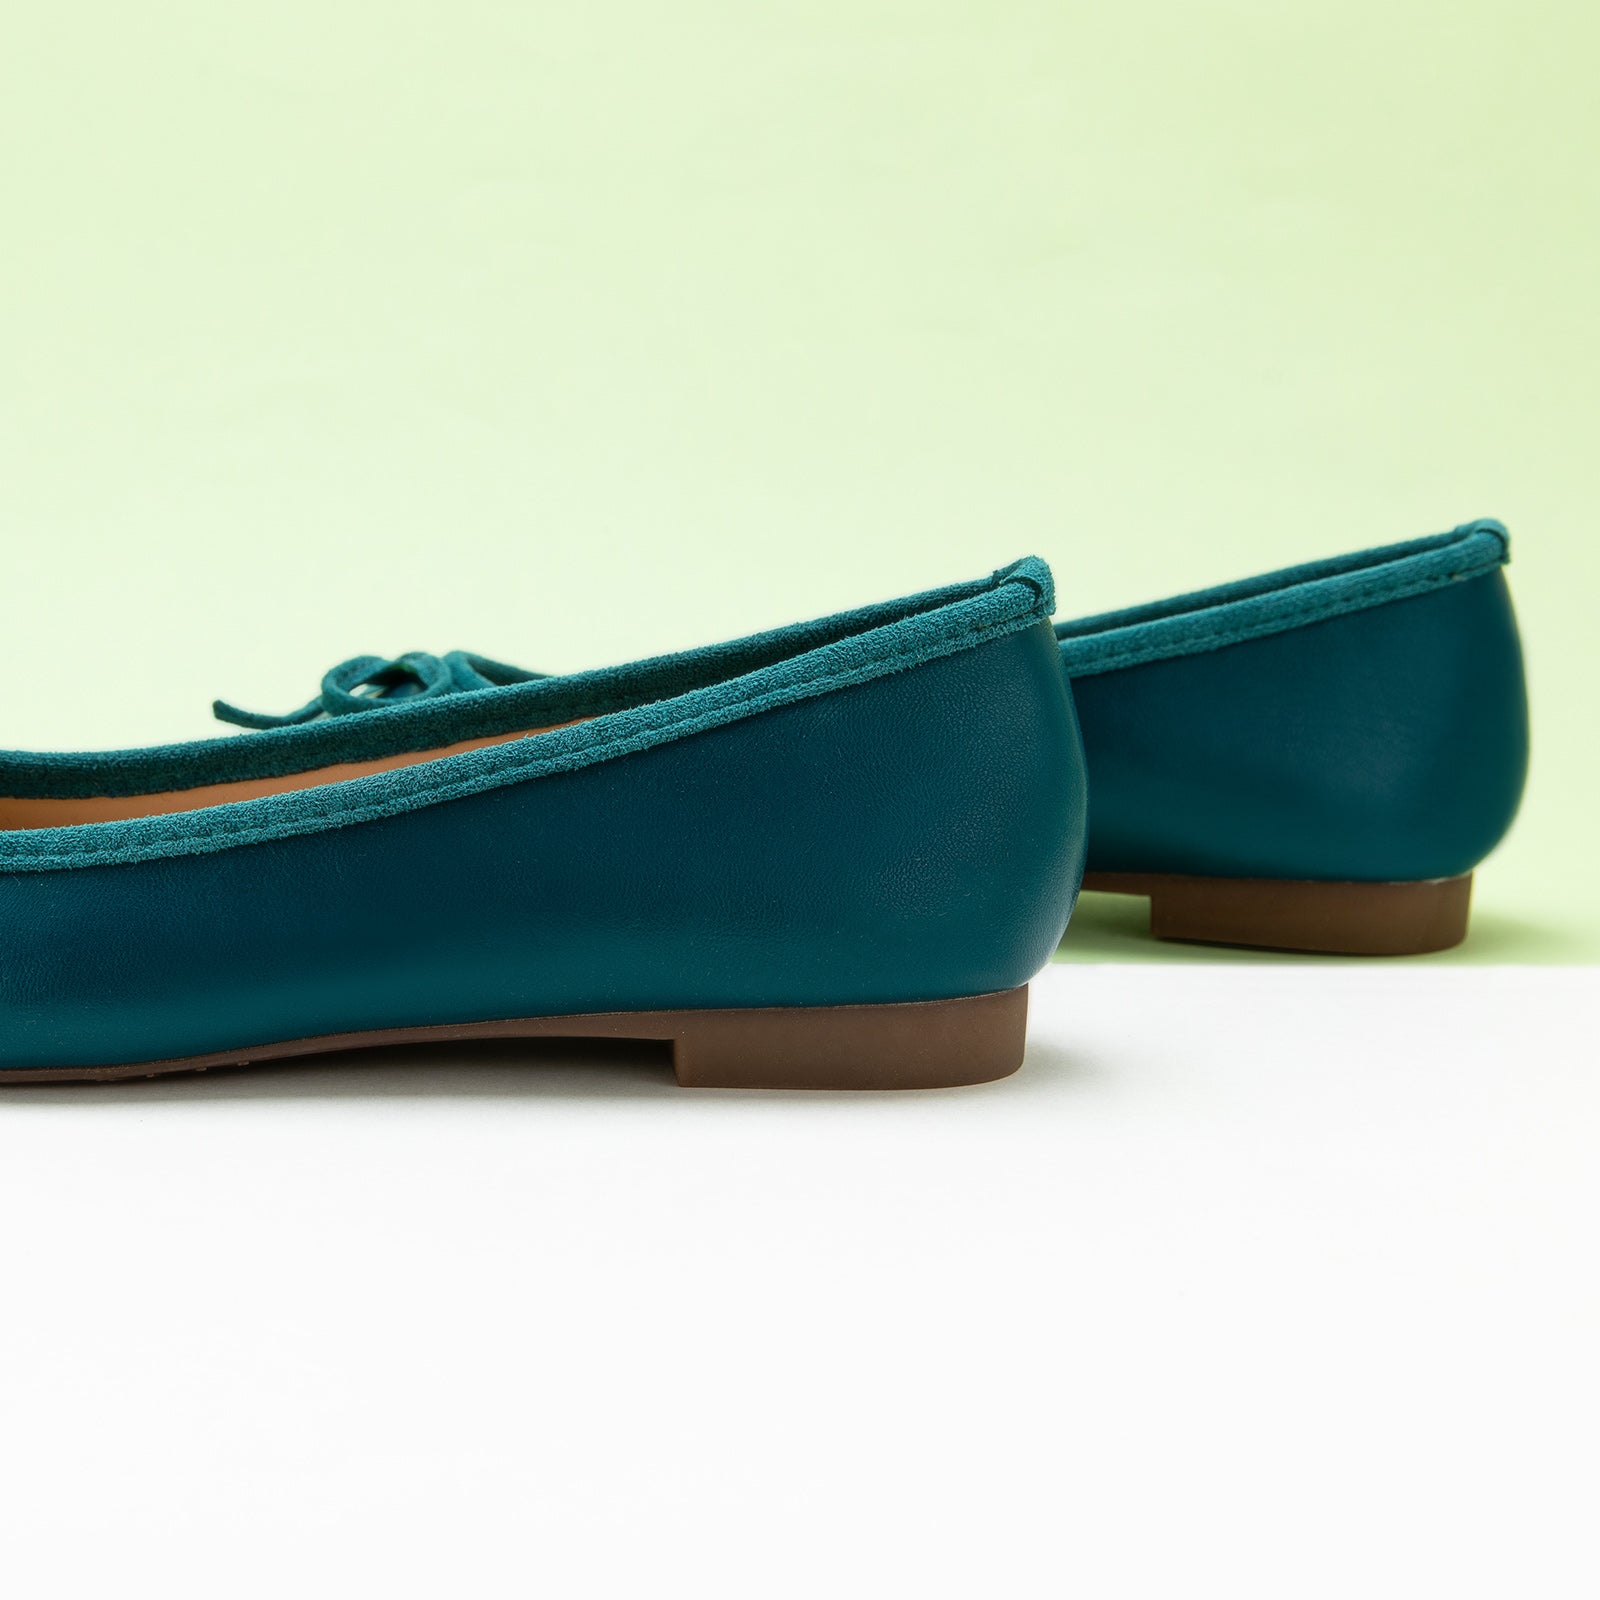 Blue Toe Bowknot Ballet Flats in Suede, perfect for a confident and fashionable look in any urban setting